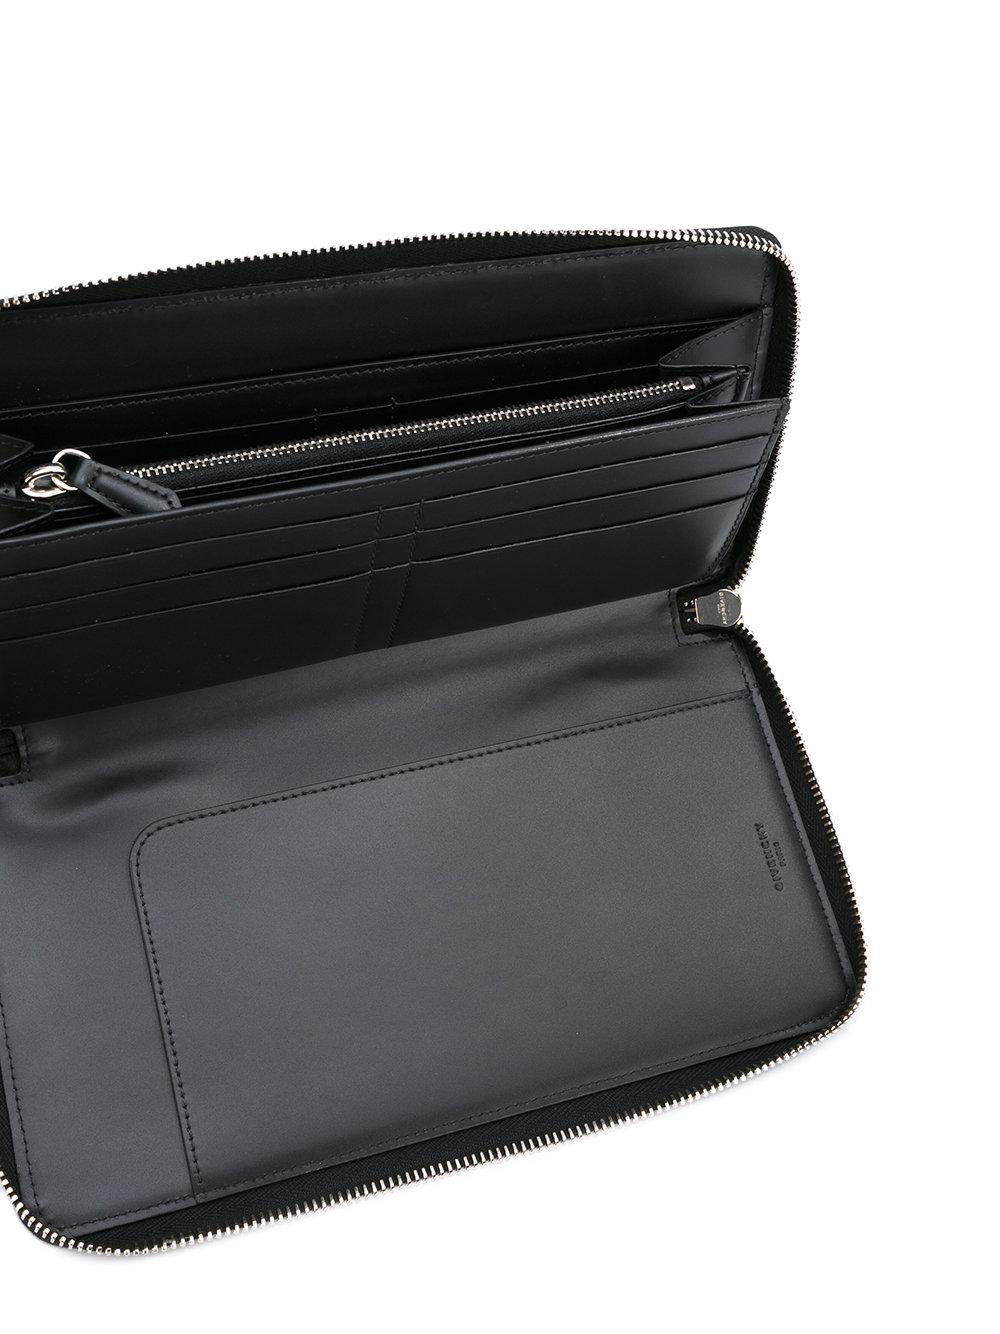 Givenchy Cotton Continental Wallet in Black for Men - Lyst